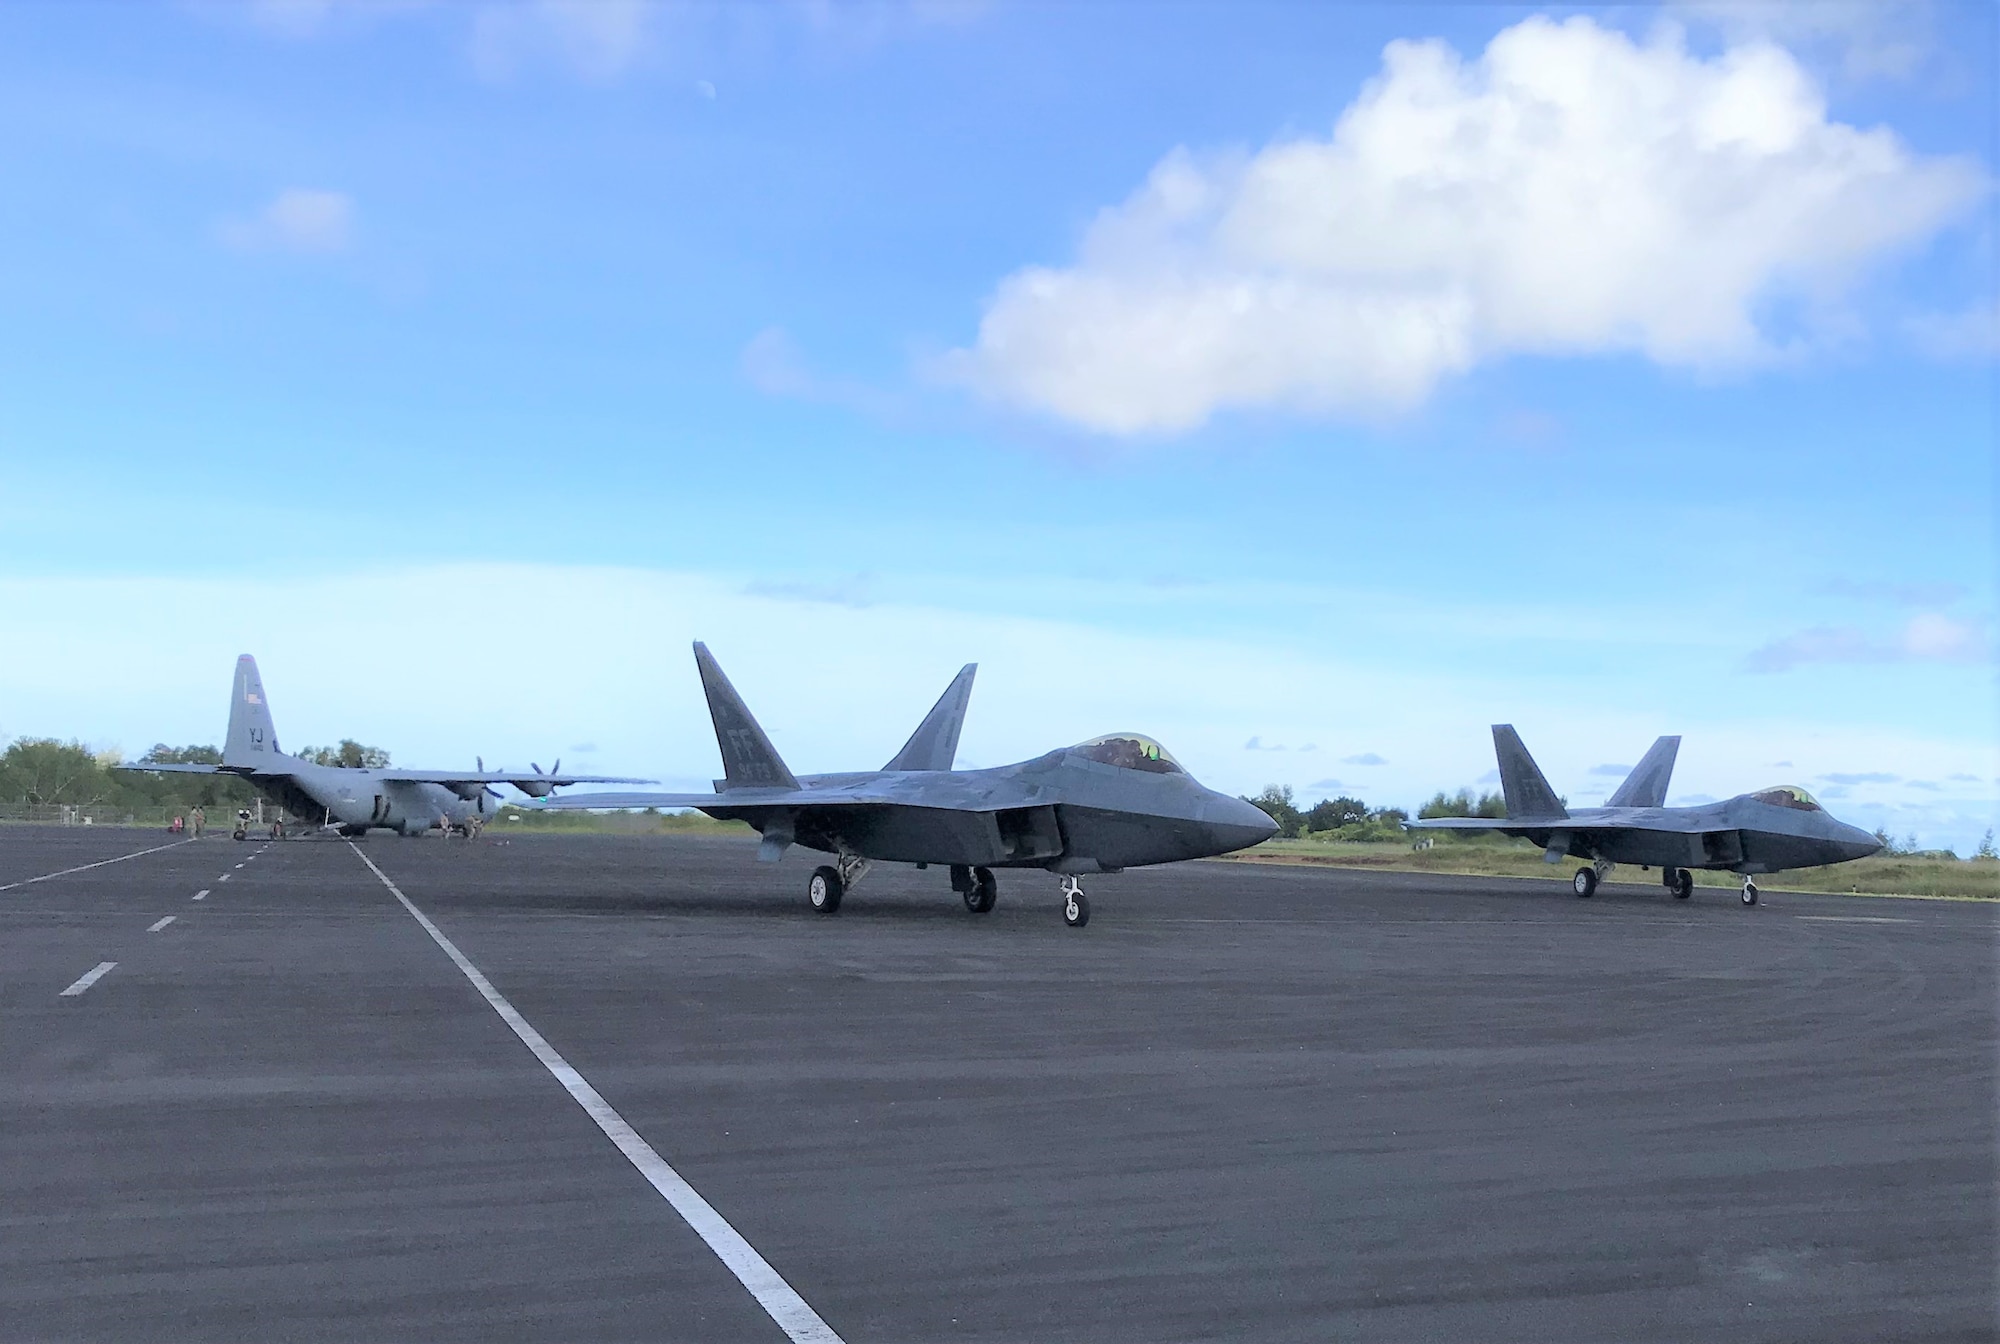 An F-22 assigned to the 94th Fighter Squadron taxies during a hot refuel during a Dynamic Force Employment at Andersen Air Force Base, Guam, Nov. 24, 2020. DFE is an operational platform that allows our forces to be strategically predictable and operationally unpredictable. The United States security presence, along with our allies and partners, underpins the peace and stability that has enabled the Indo-Pacific region to develop and prosper for more than seven decades. (Curtsey photo)